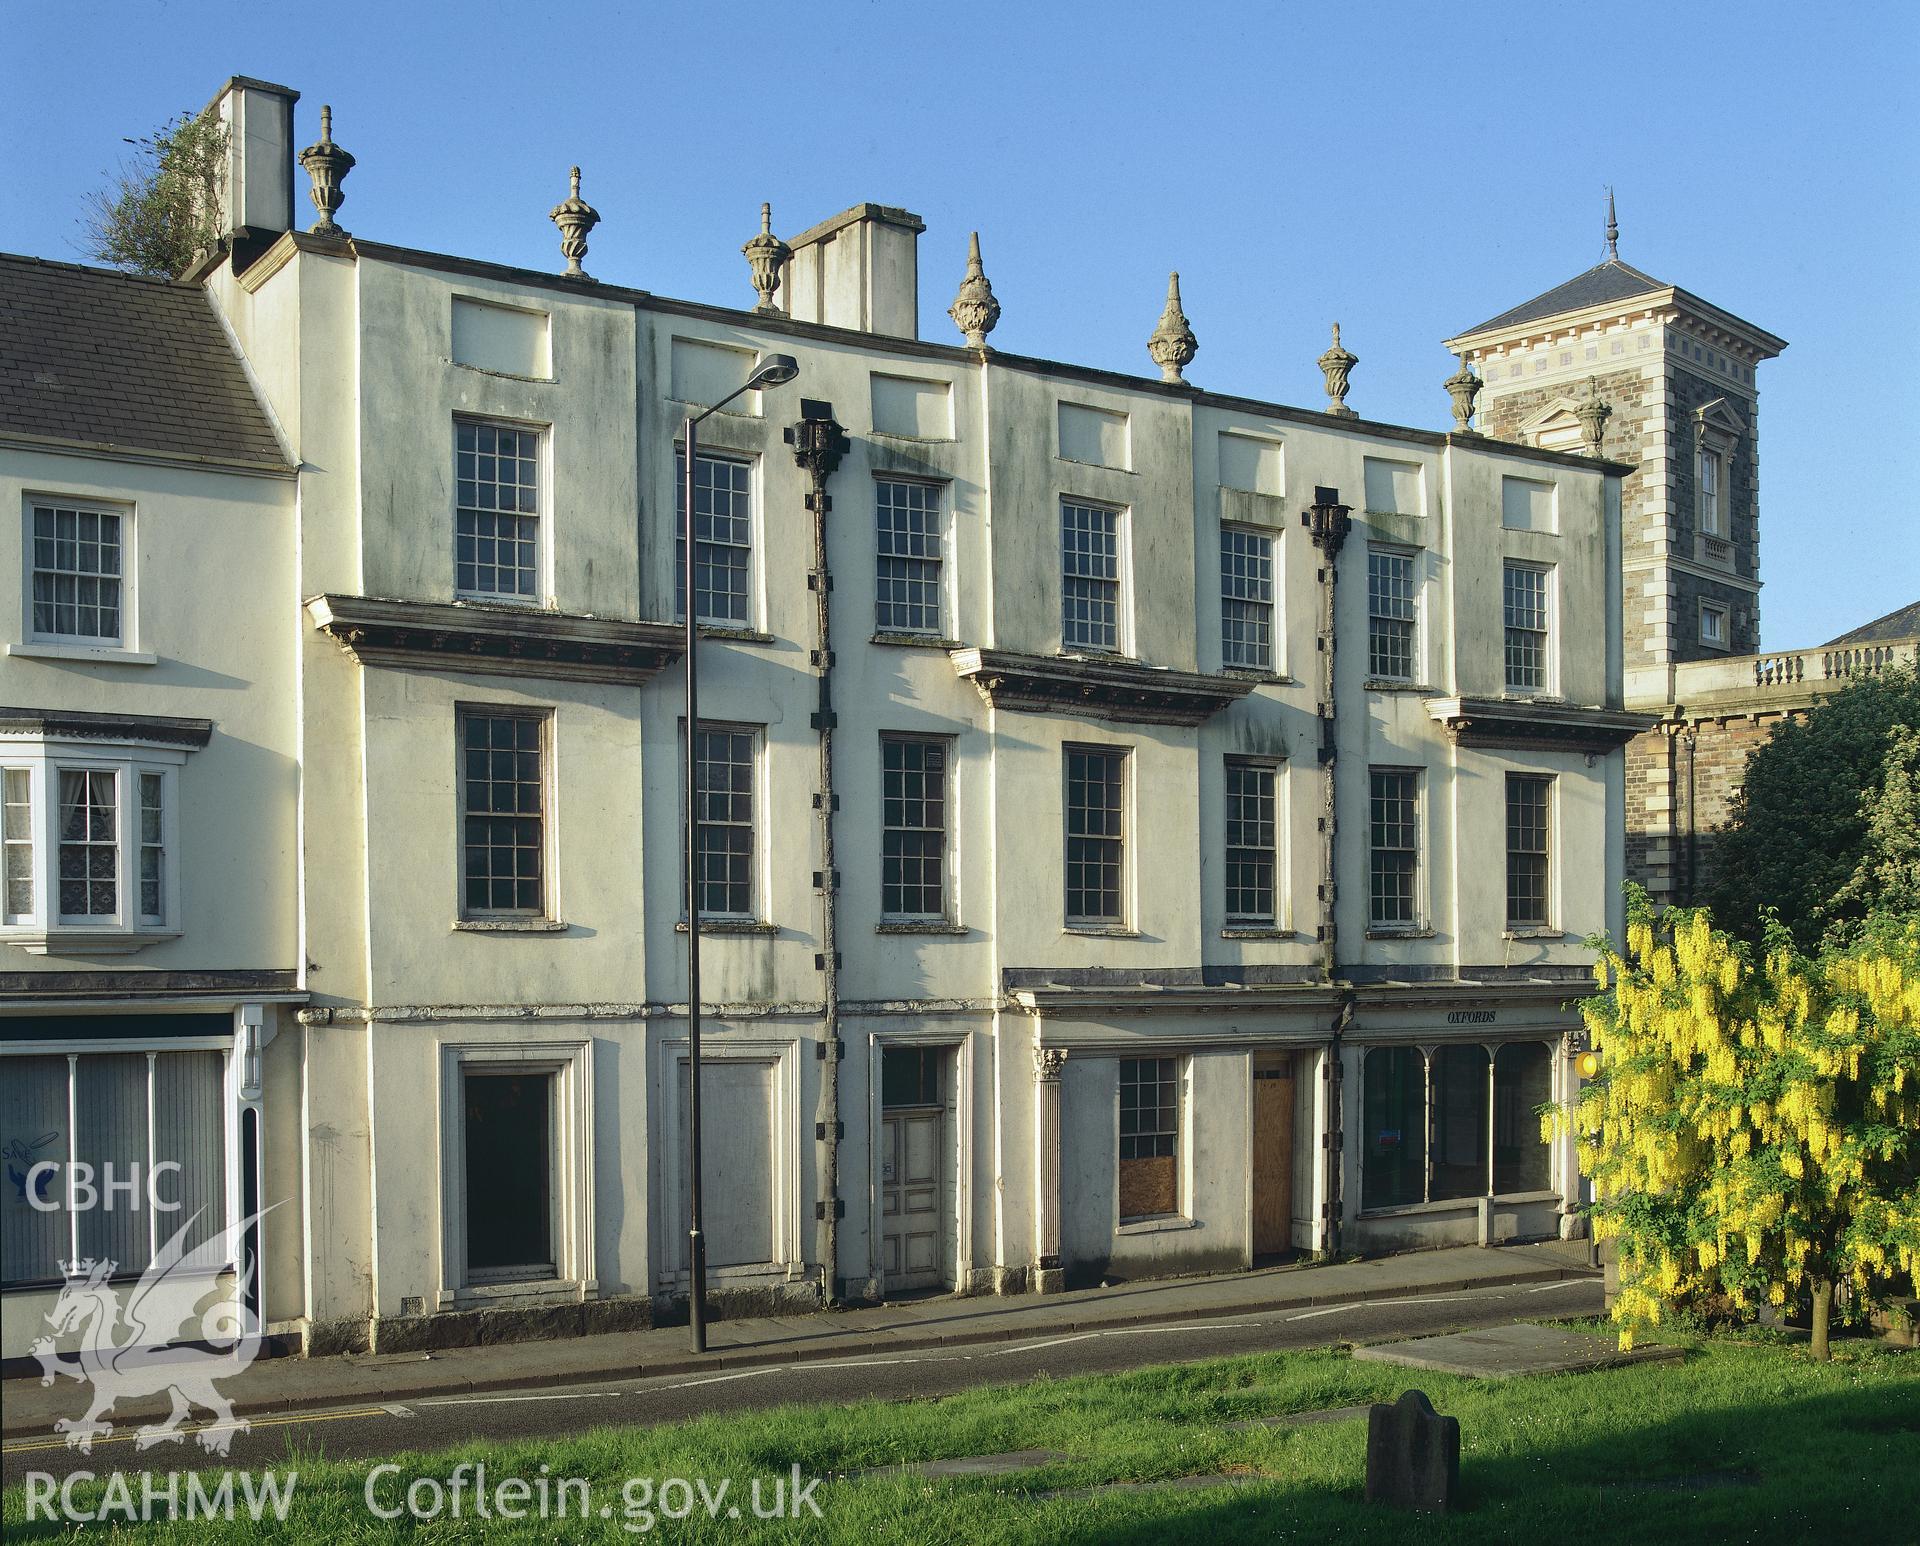 RCAHMW colour transparency showing exterior view of Llanelli House, Llanelli